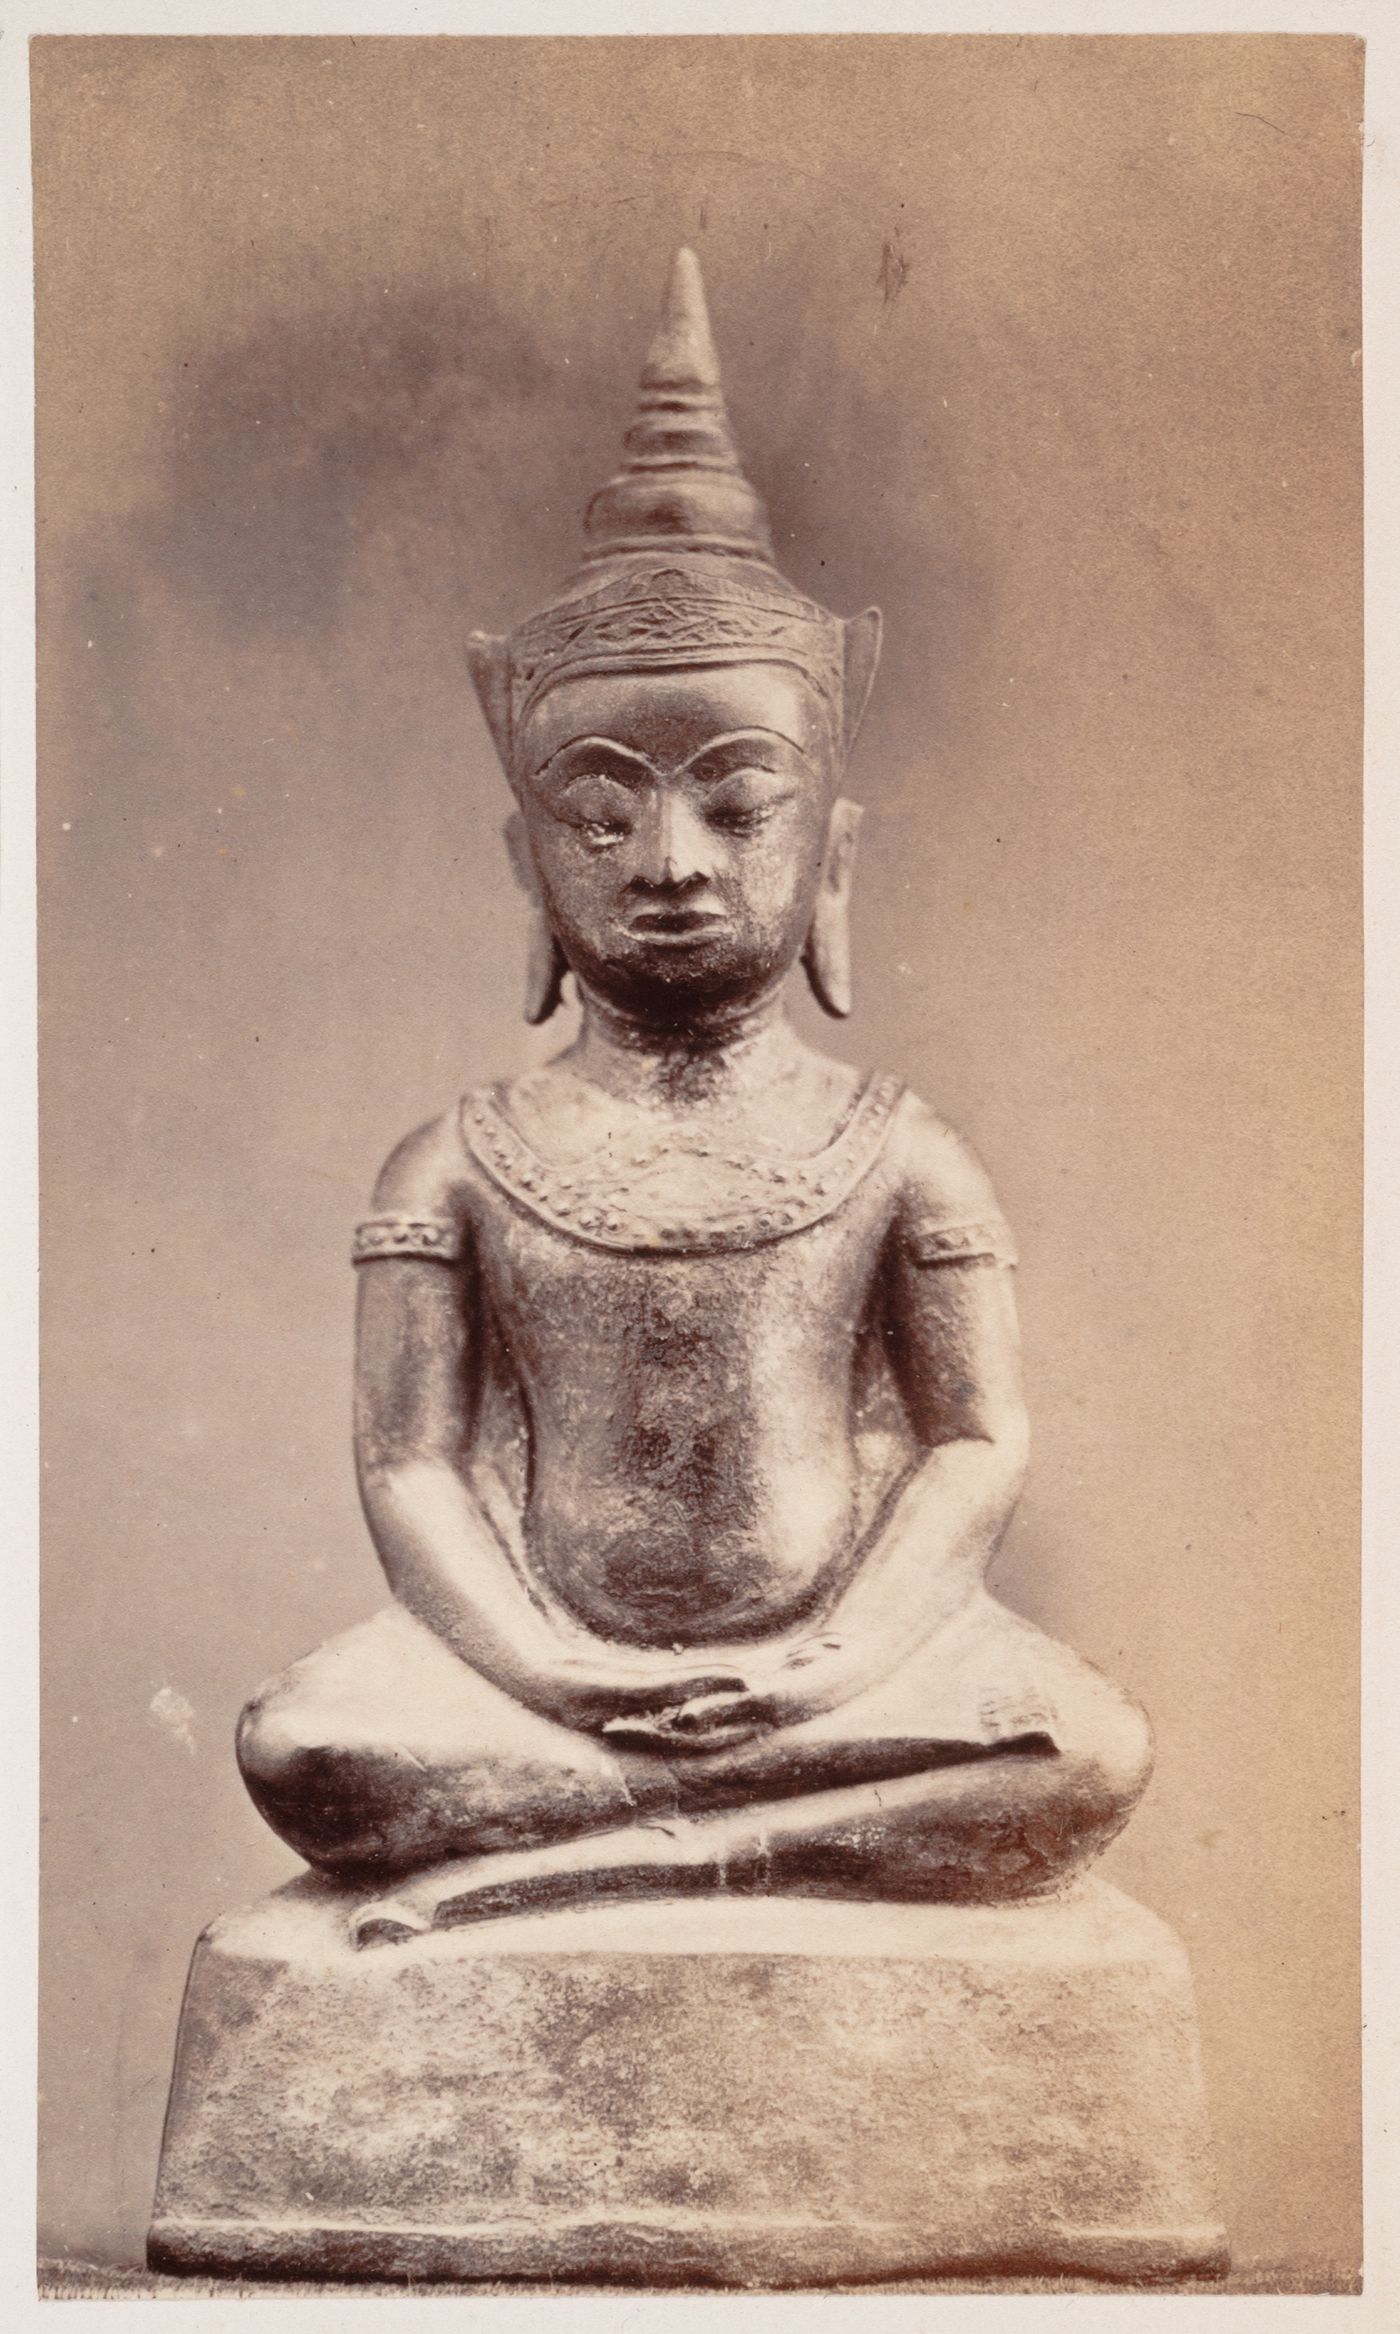 Interior view of a statue of Buddha, probably in Cambodia